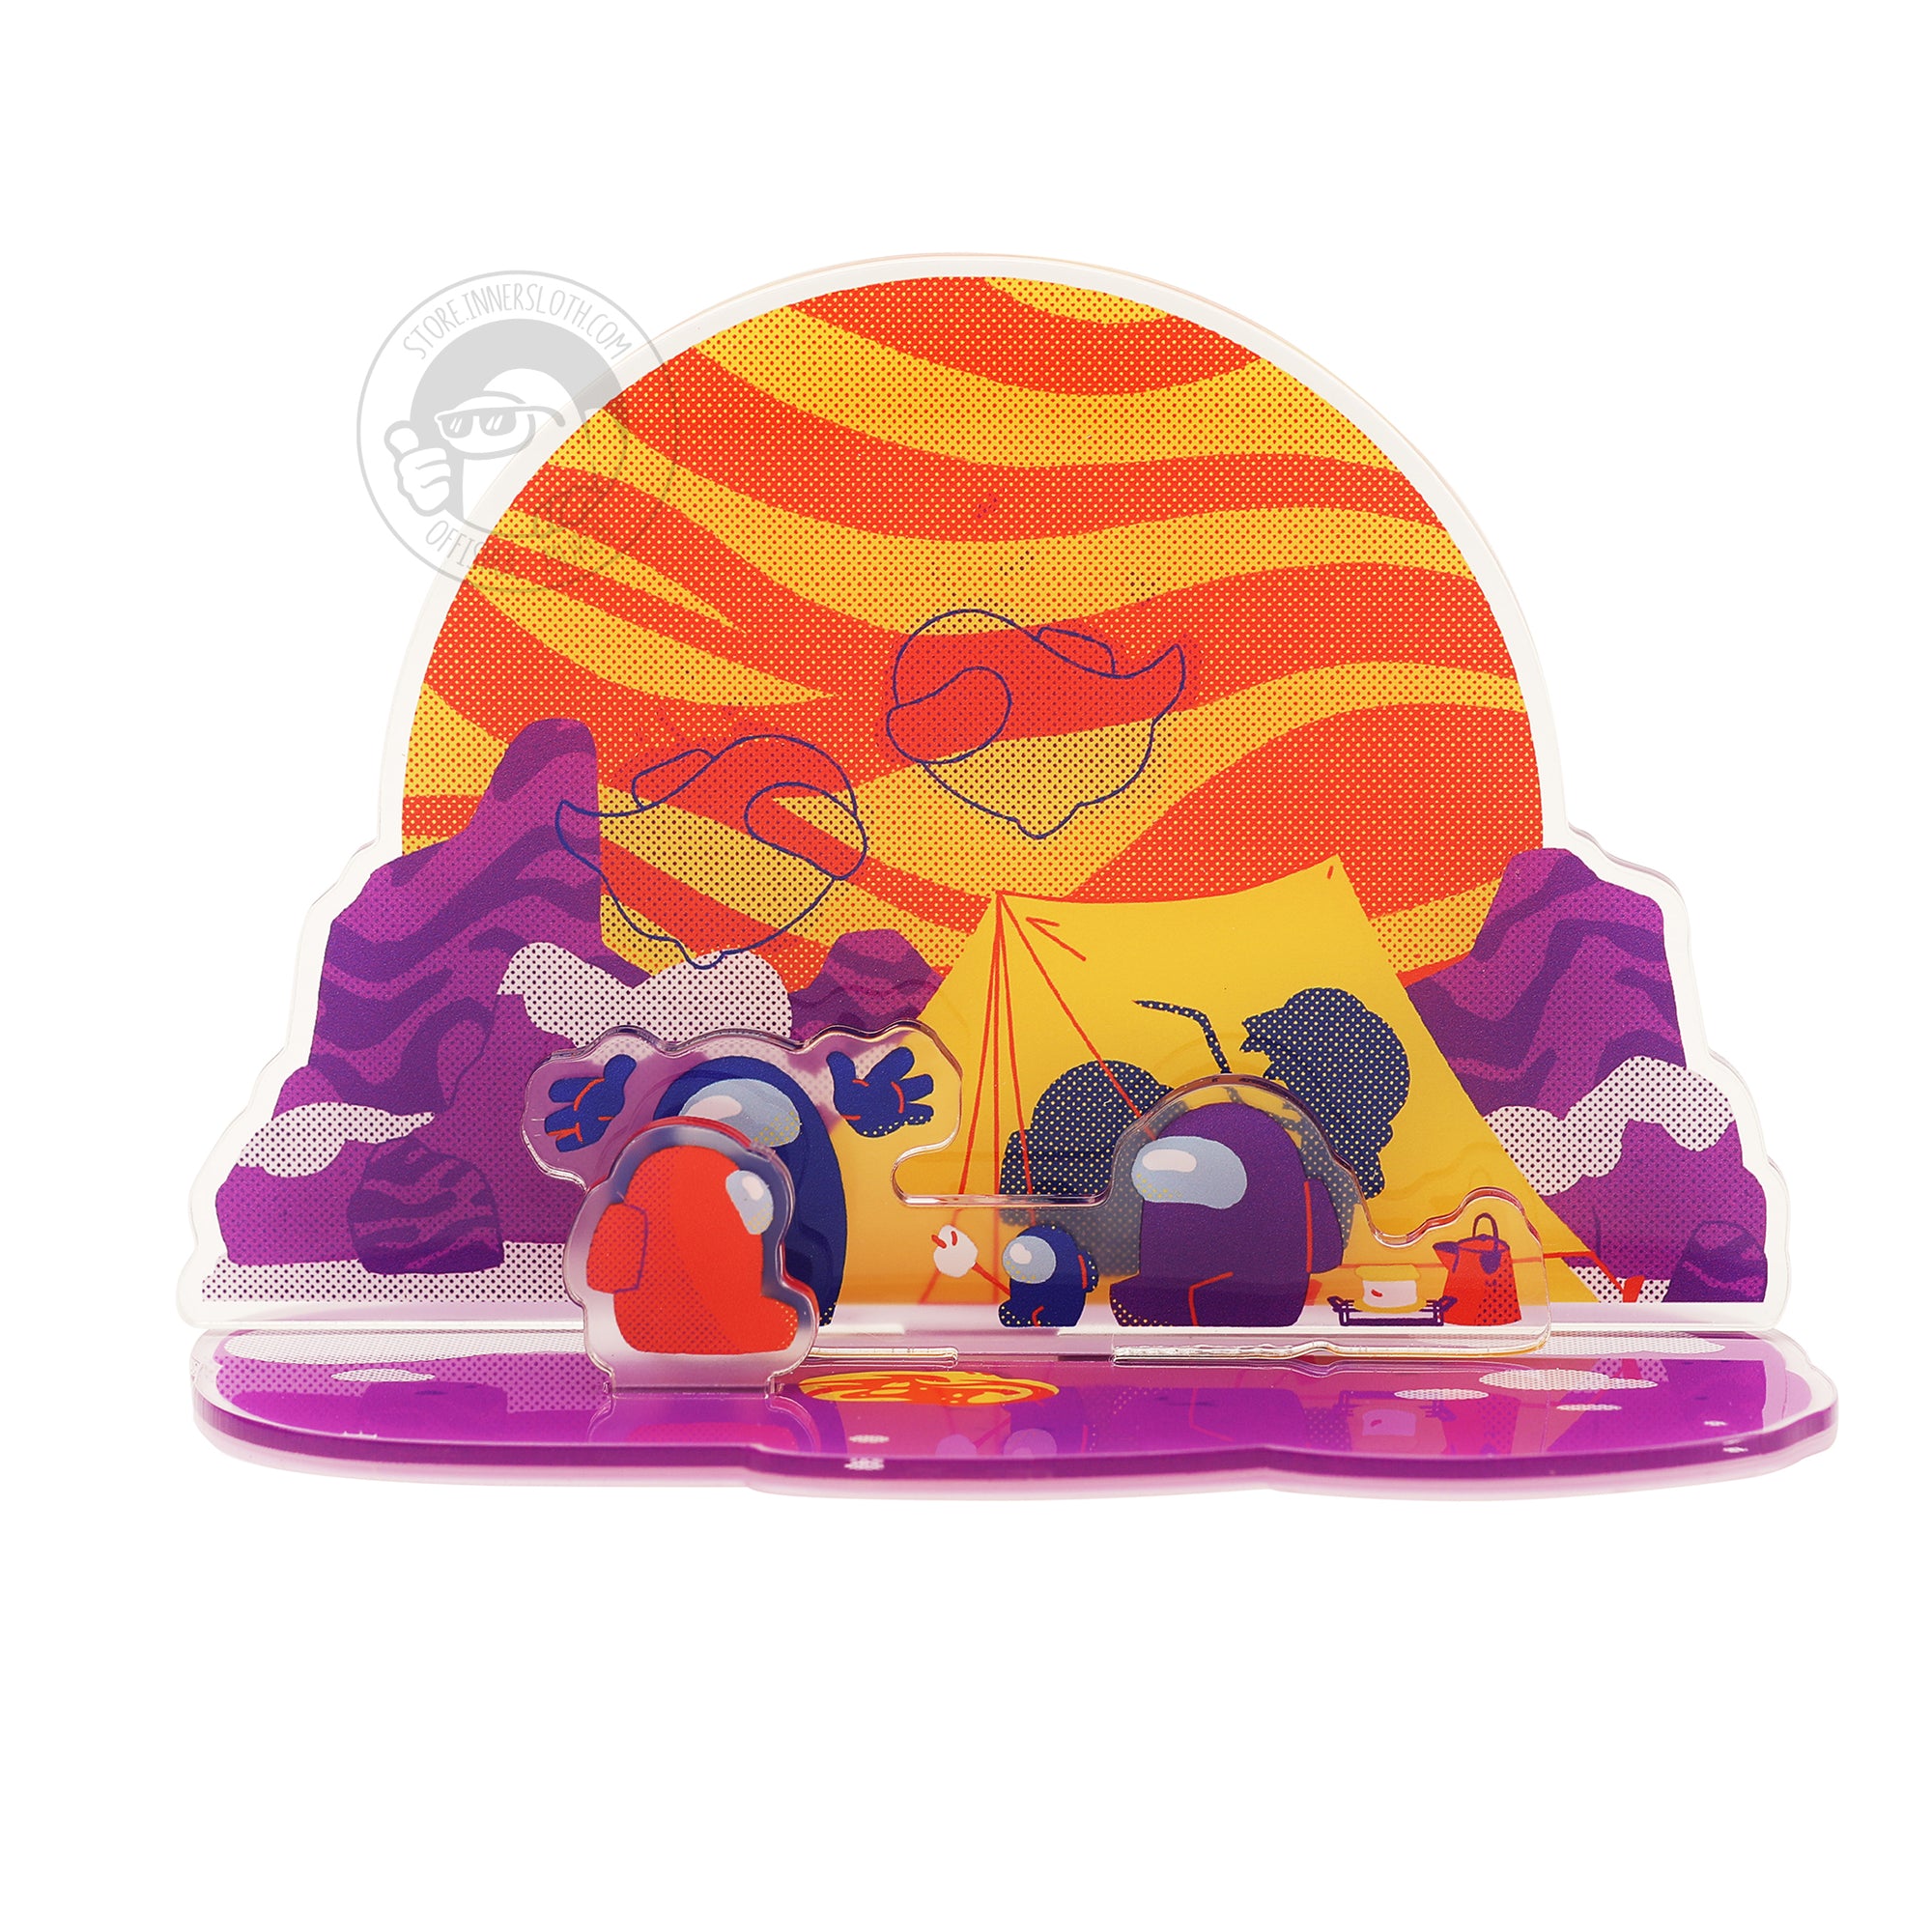 A product photo of the Among Us: Polus Camping Standee. It is an acrylic standee with different layers depicting a scene. The standee depicts a purple, blue and red crewmate with a camping tent among the snowy mountains of Polus with a large orange and yellow swirly sun in the background.